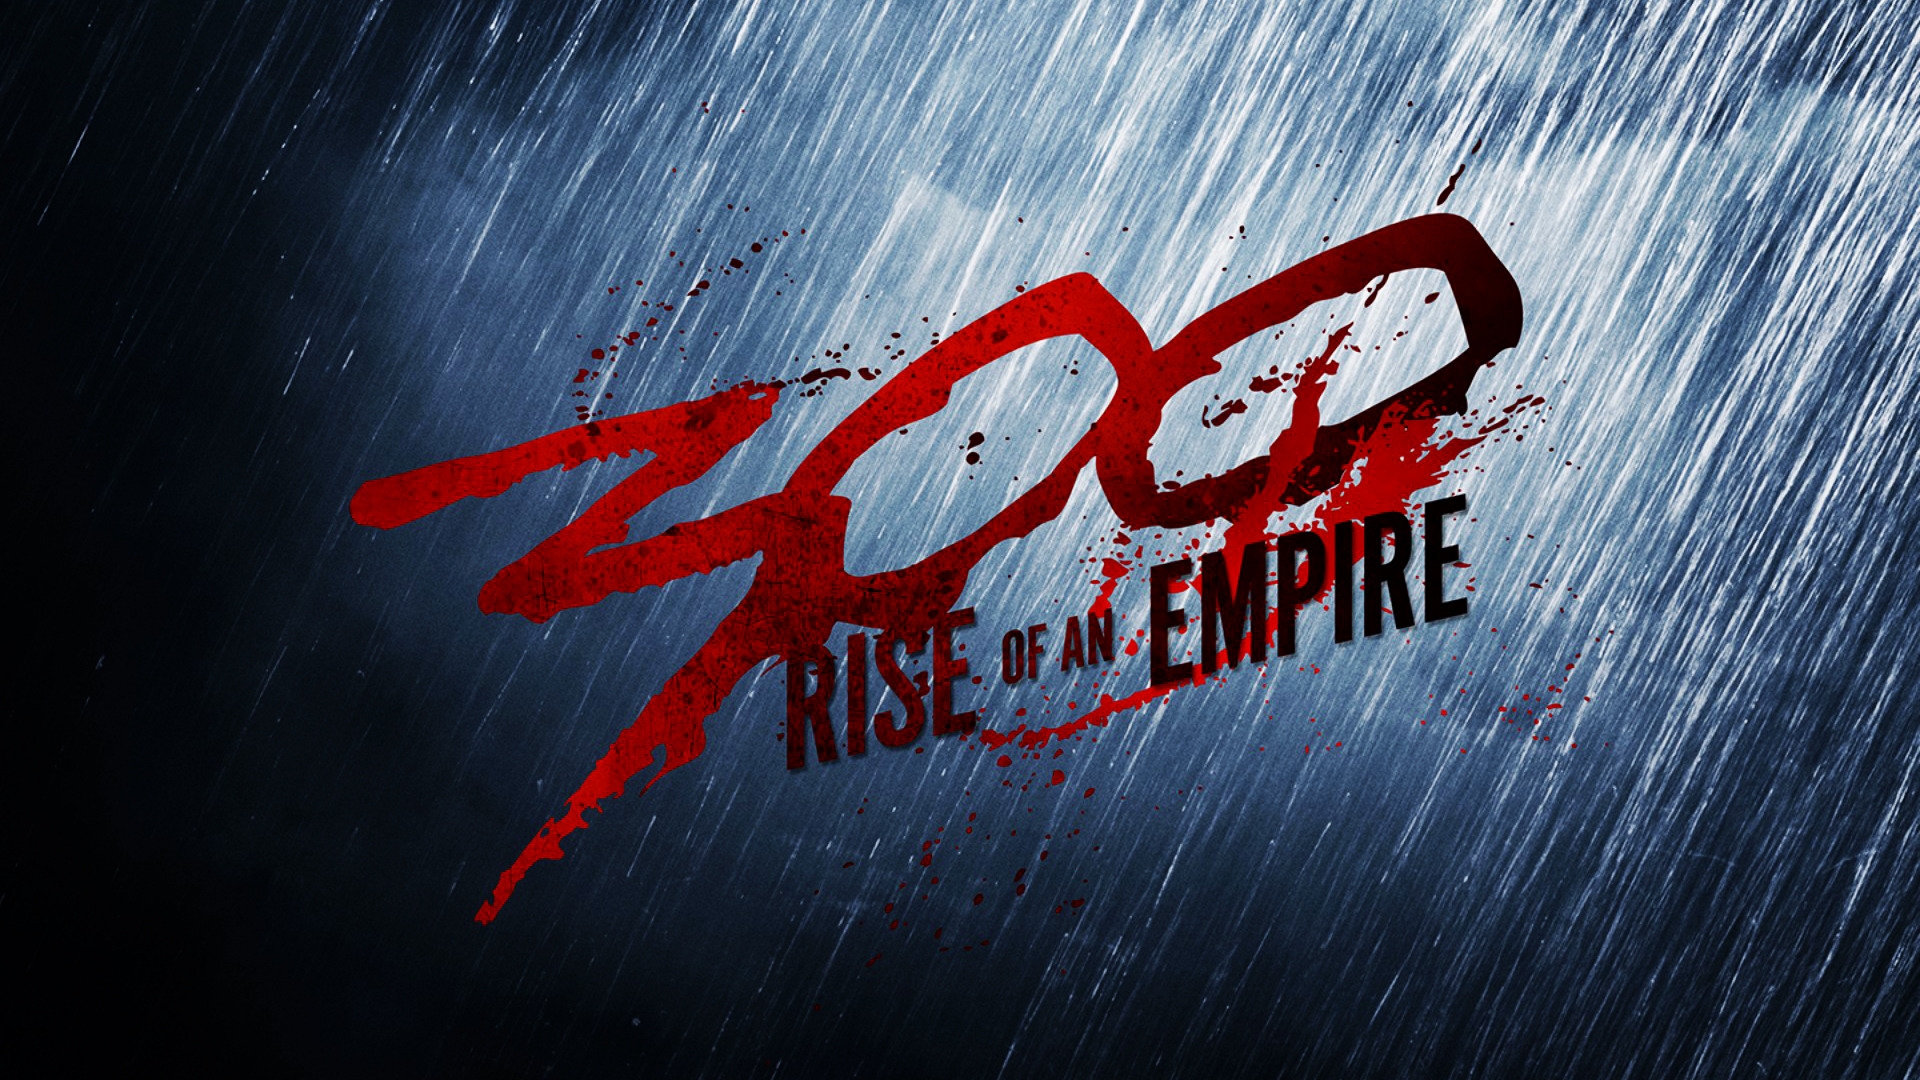 300 Rise of an Empire for 1920 x 1080 HDTV 1080p resolution